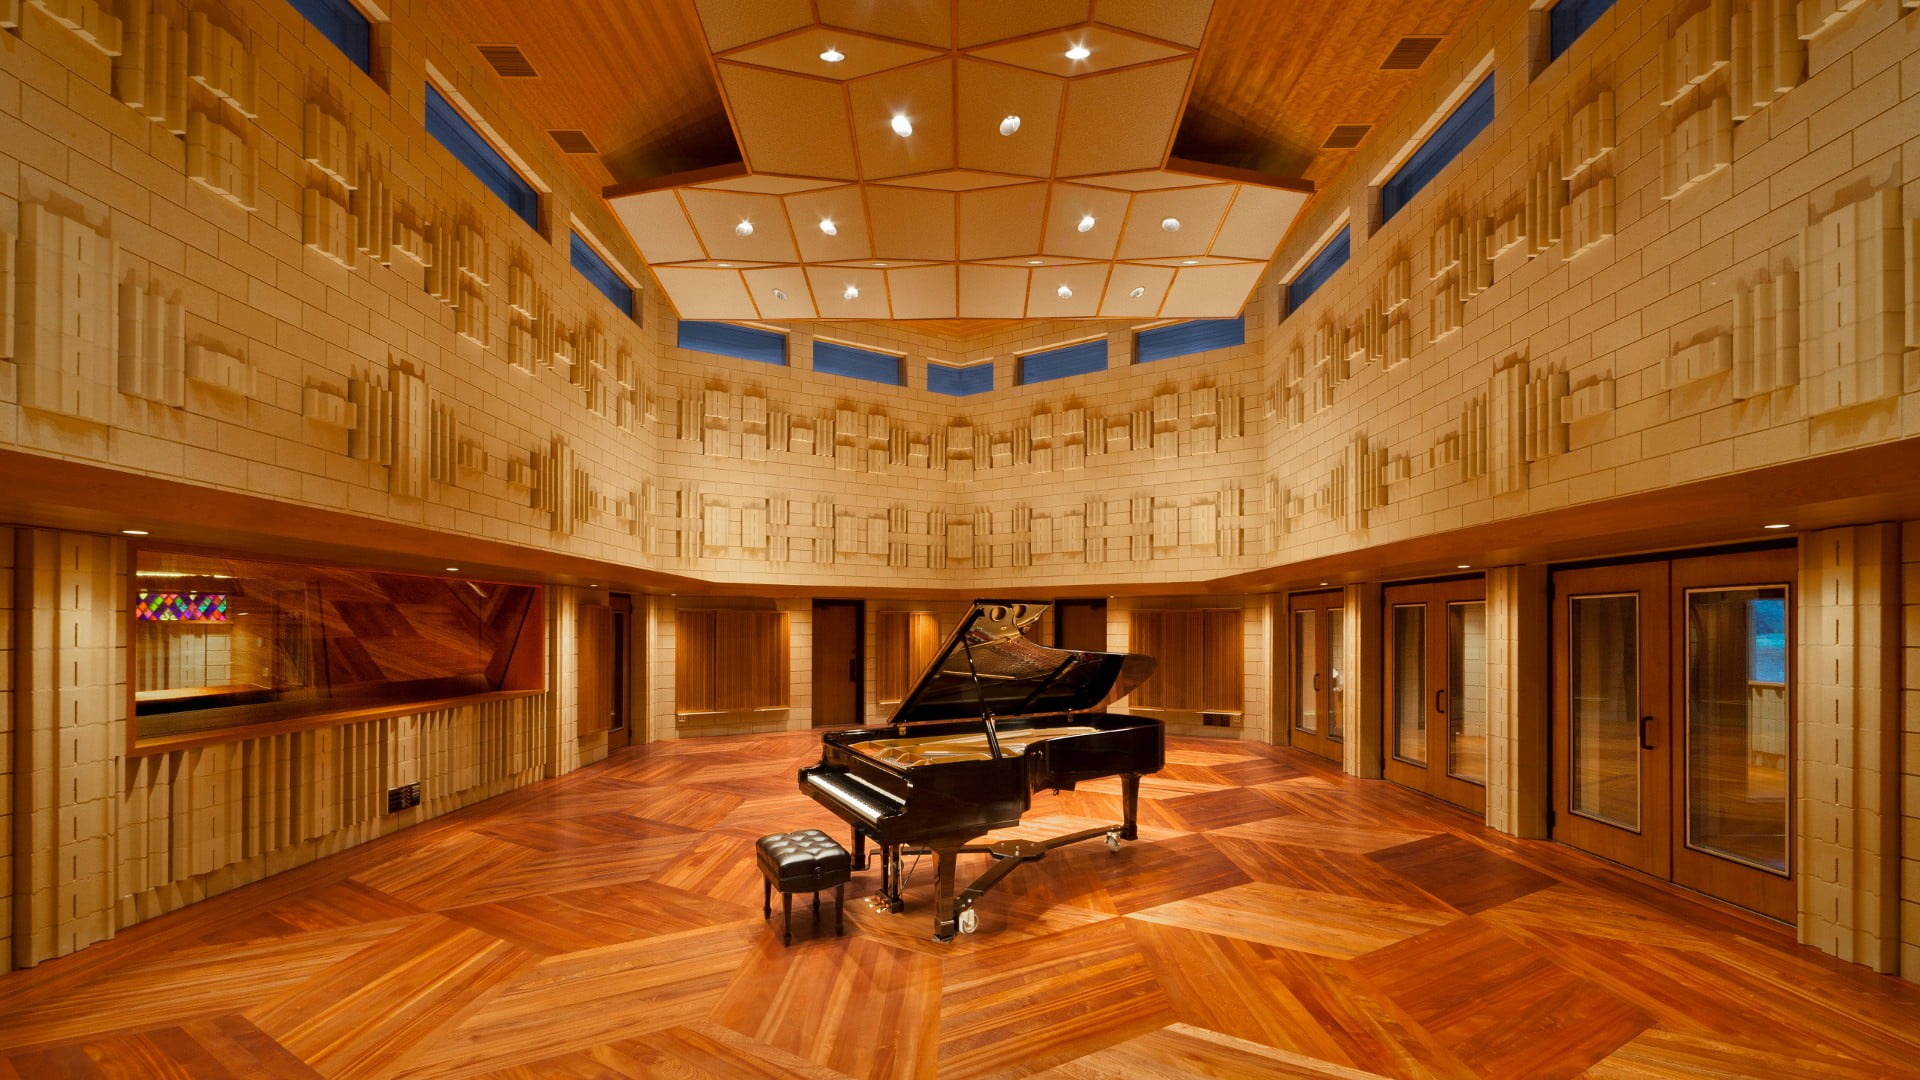 Fortepiano: Brown And Black Wooden Table, Soundproofing Walls, Chamber Music. 1920x1080 Full HD Wallpaper.